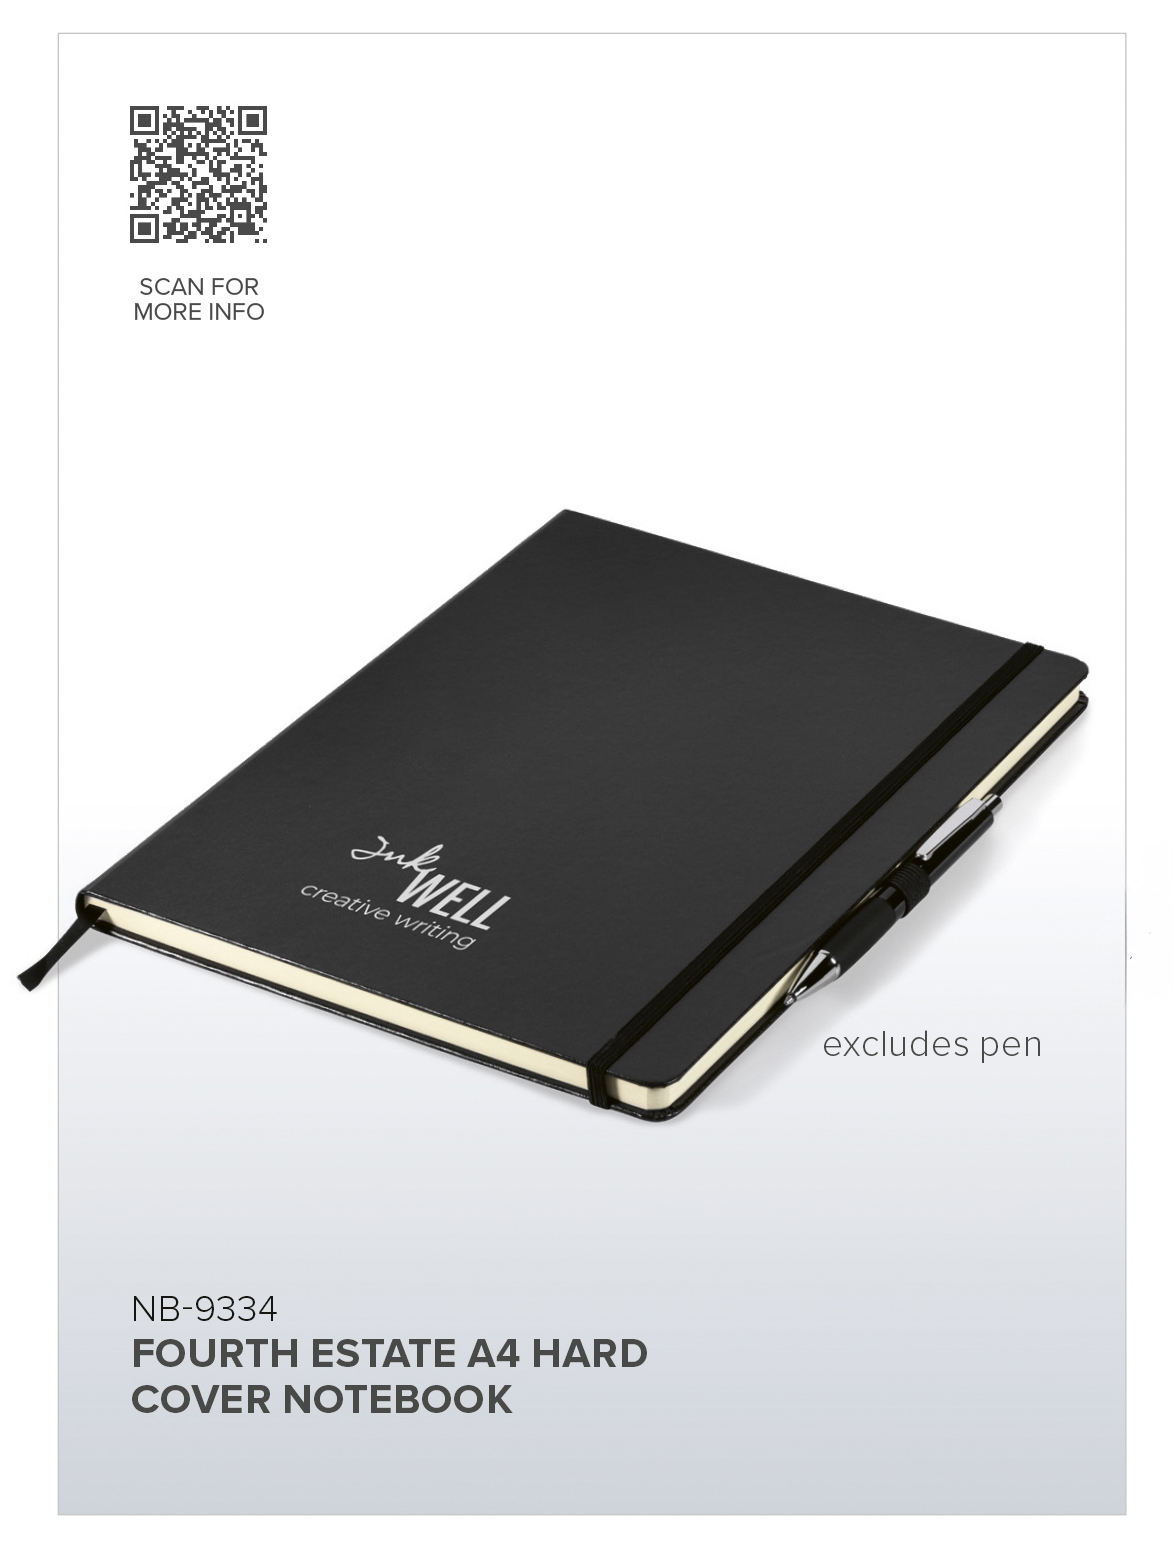 NB-9334 - Fourth Estate A4 Hard Cover Notebook - Catalogue Image